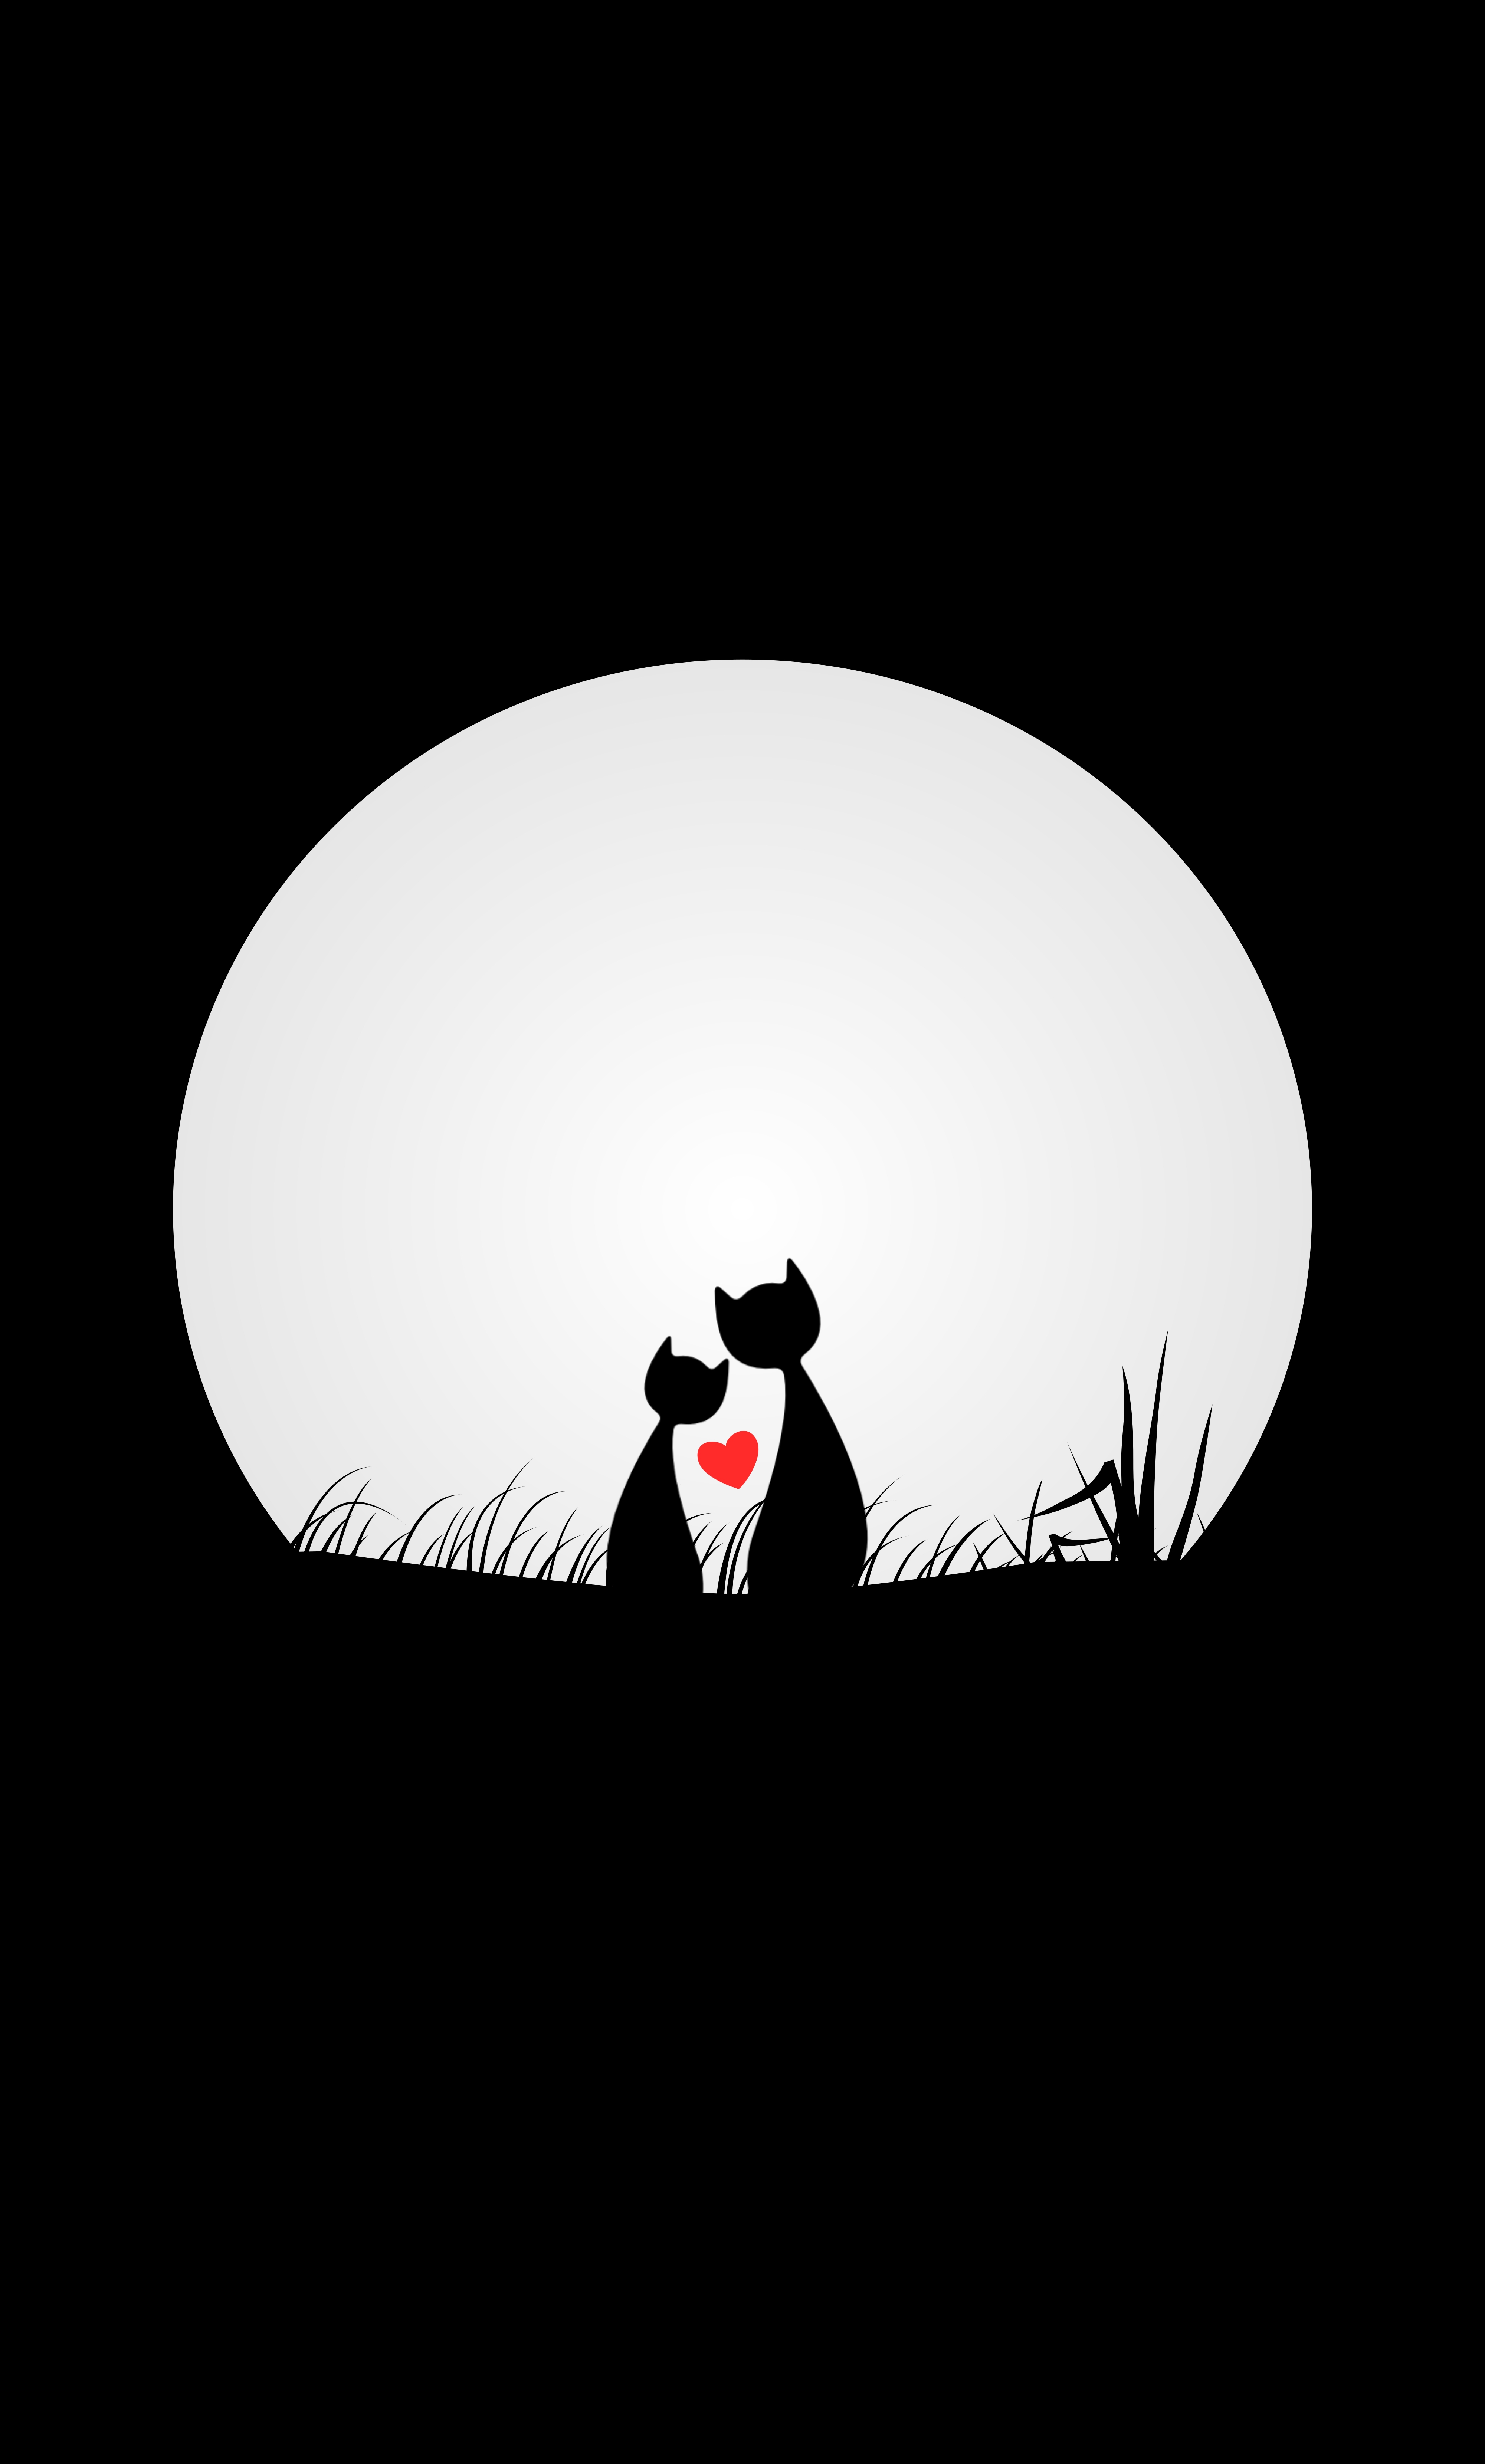 Cool Wallpapers love, cats, night, moon, vector, silhouettes